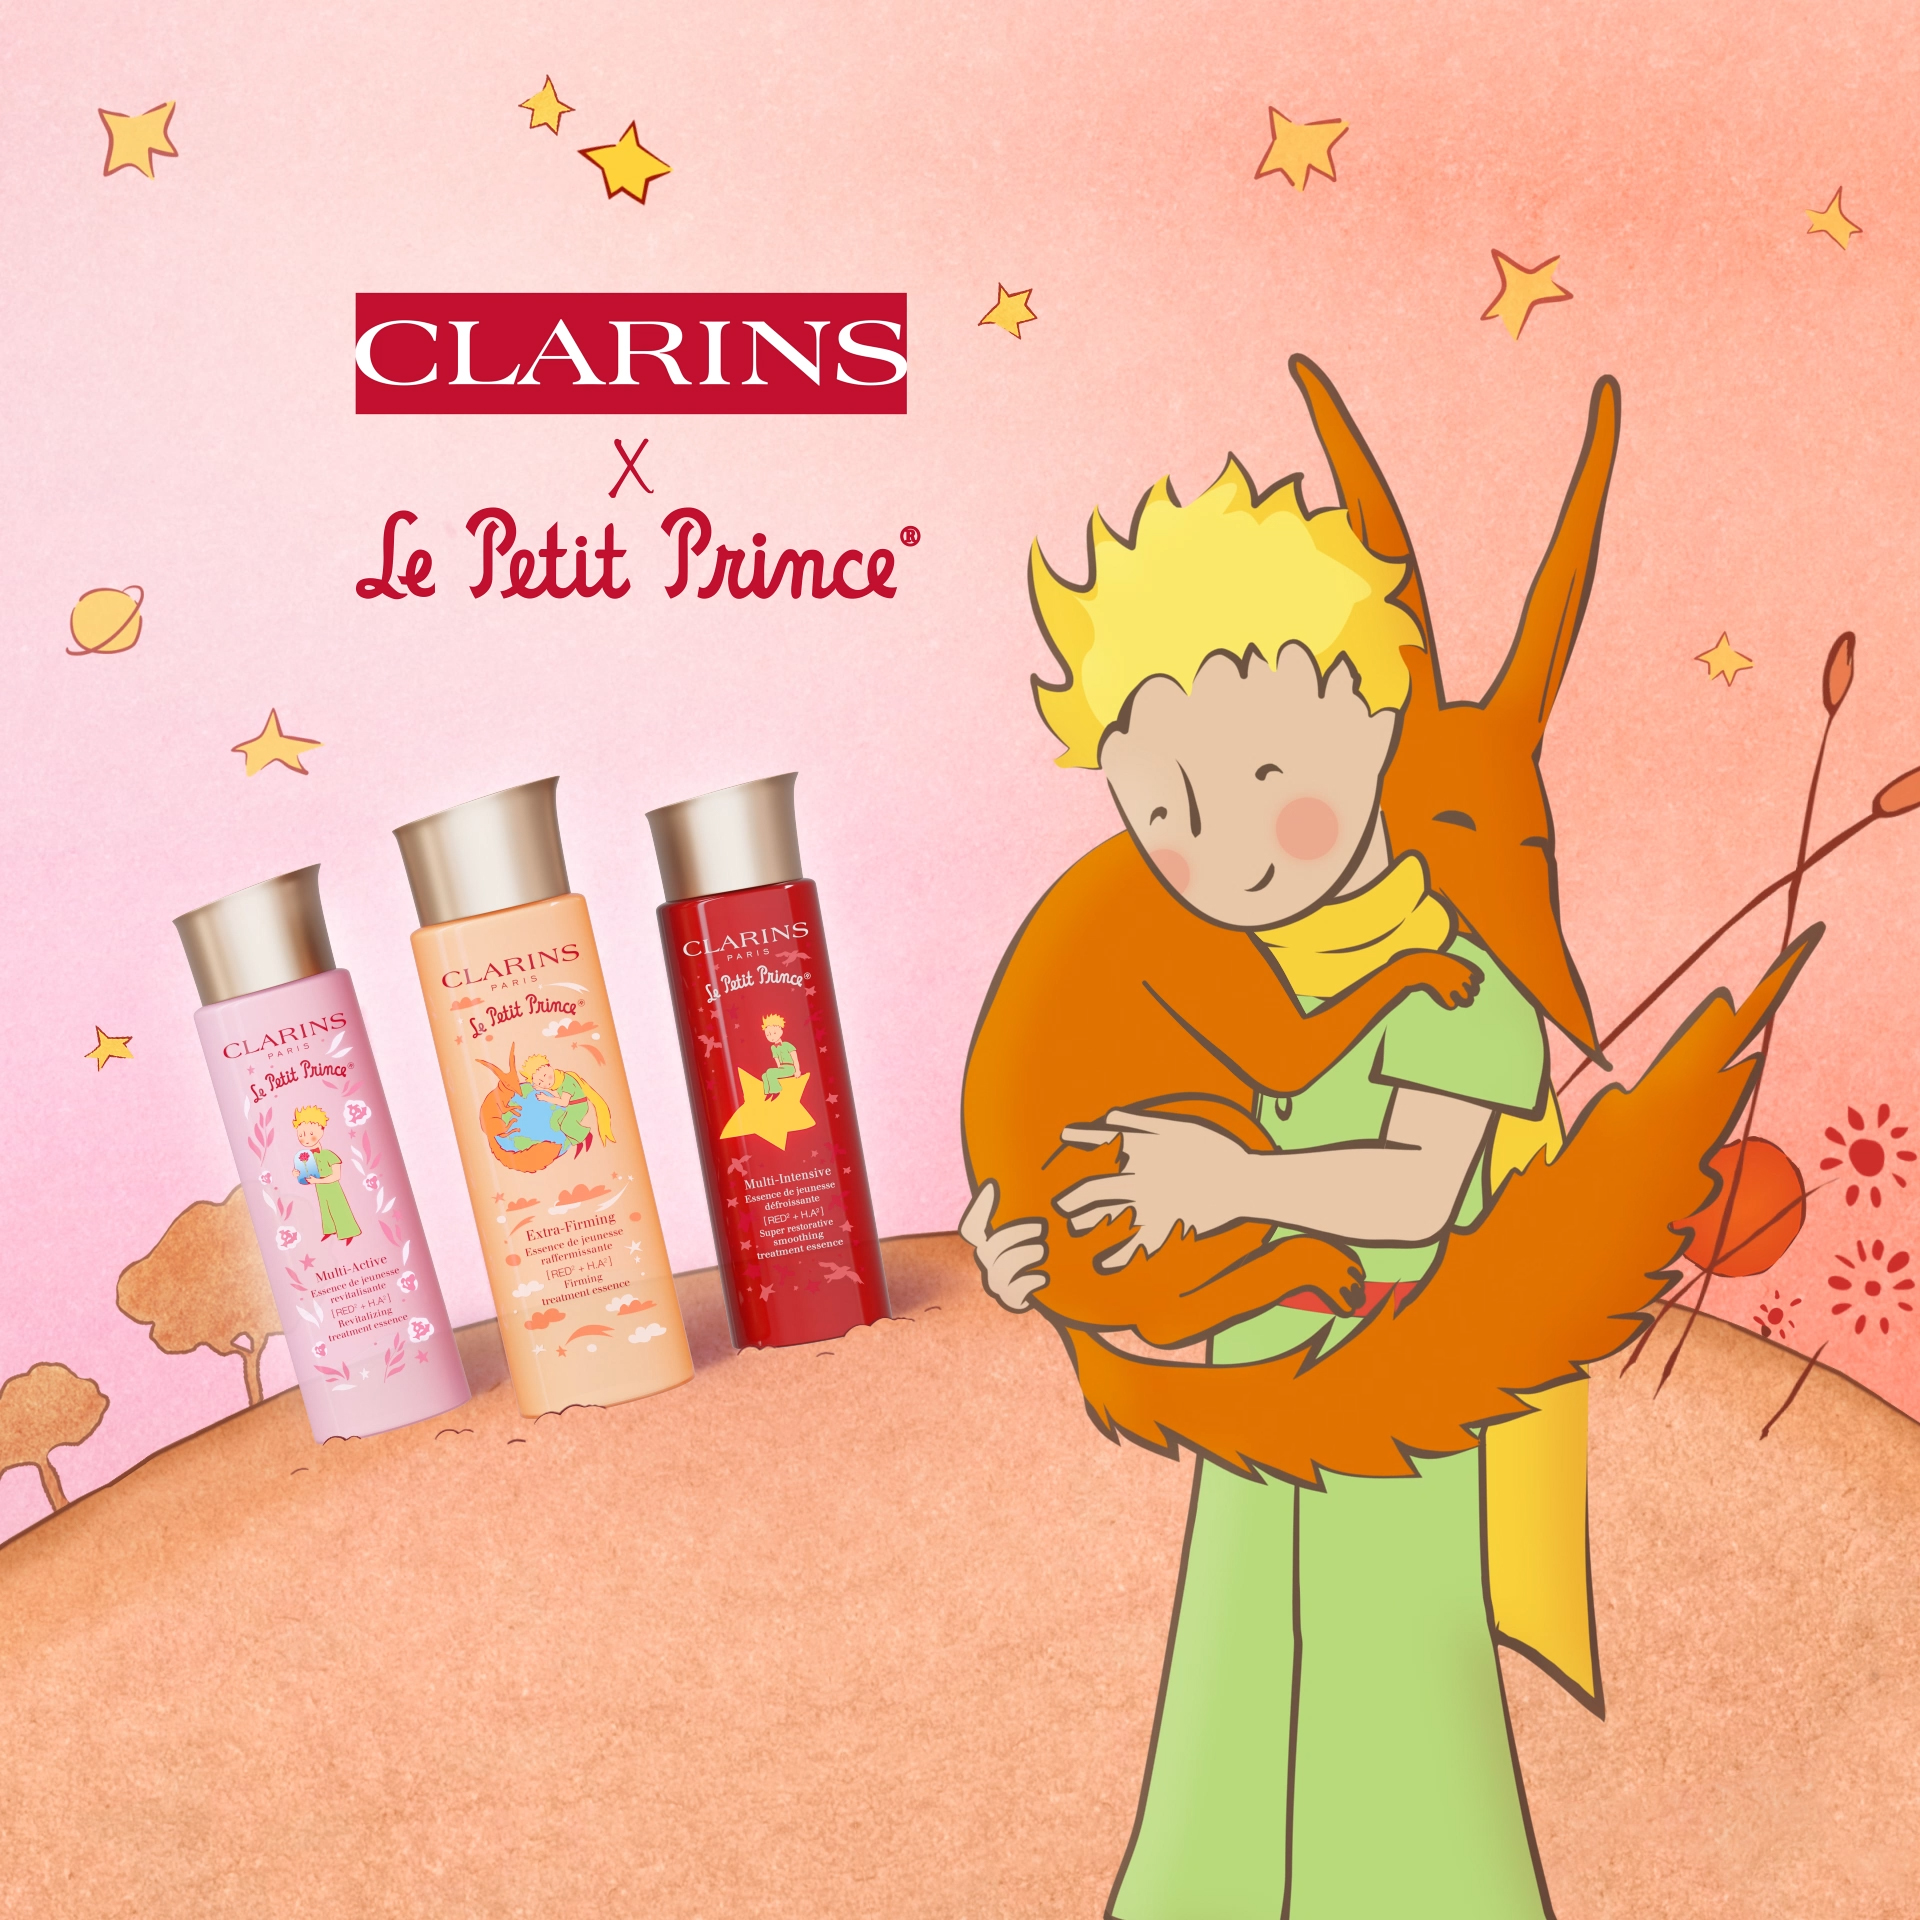 Clarins Multi-Active Revitalizing Treatment Essence the little Prince limited edition 200 ml,Clarins Multi-Active Revitalizing Treatment Essence the little Prince limited edition 200 ml ราคา,Clarins Multi-Active Revitalizing Treatment Essence the little Prince limited edition 200 ml รีวิว,Clarins Multi-Active Revitalizing Treatment Essence the little Prince limited edition 200 ml review